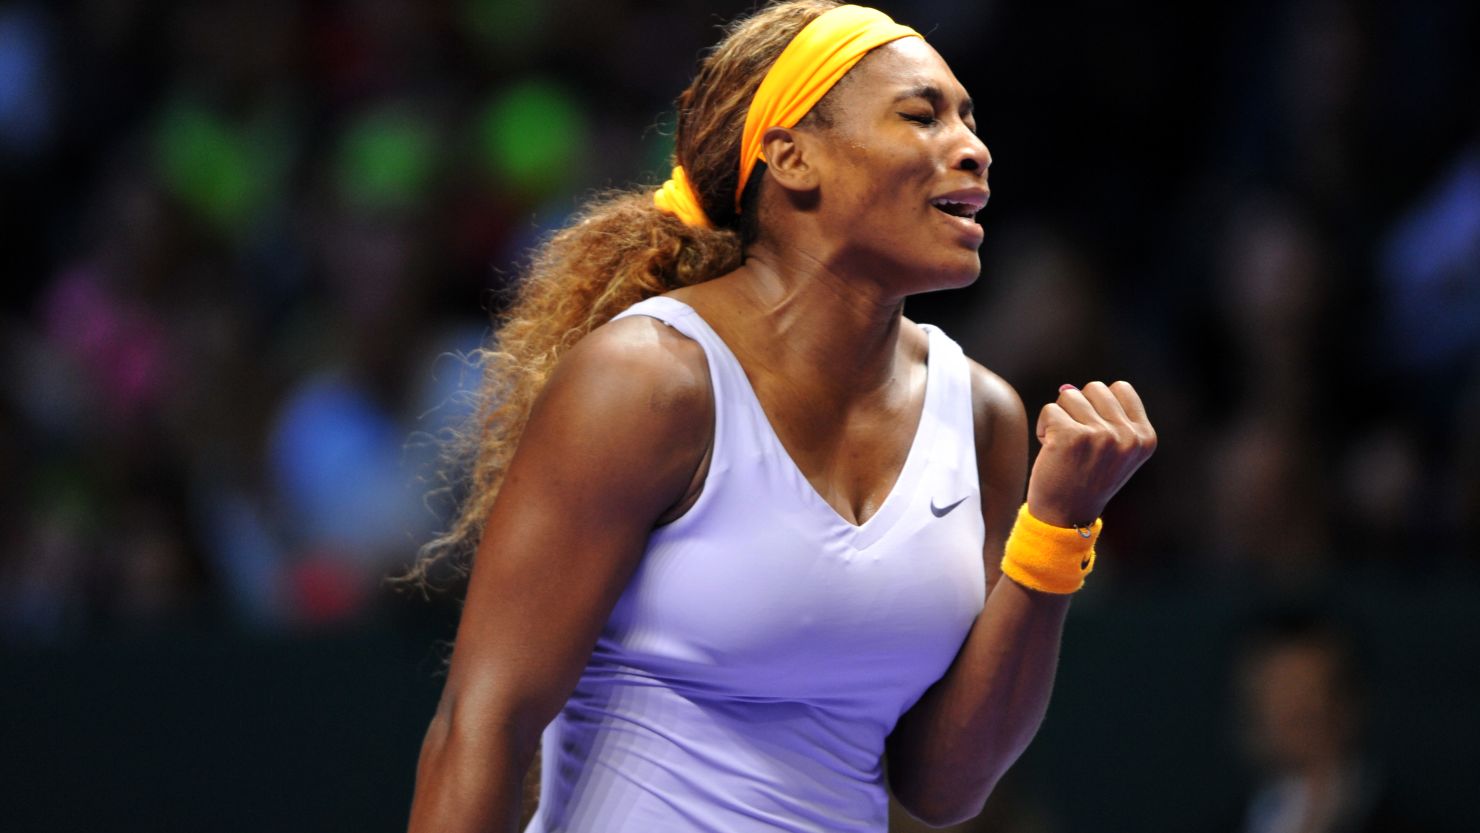 Serena Williams fought off a determined Jelena Jankovic to reach the final of the WTA Championhips in Istanbul.